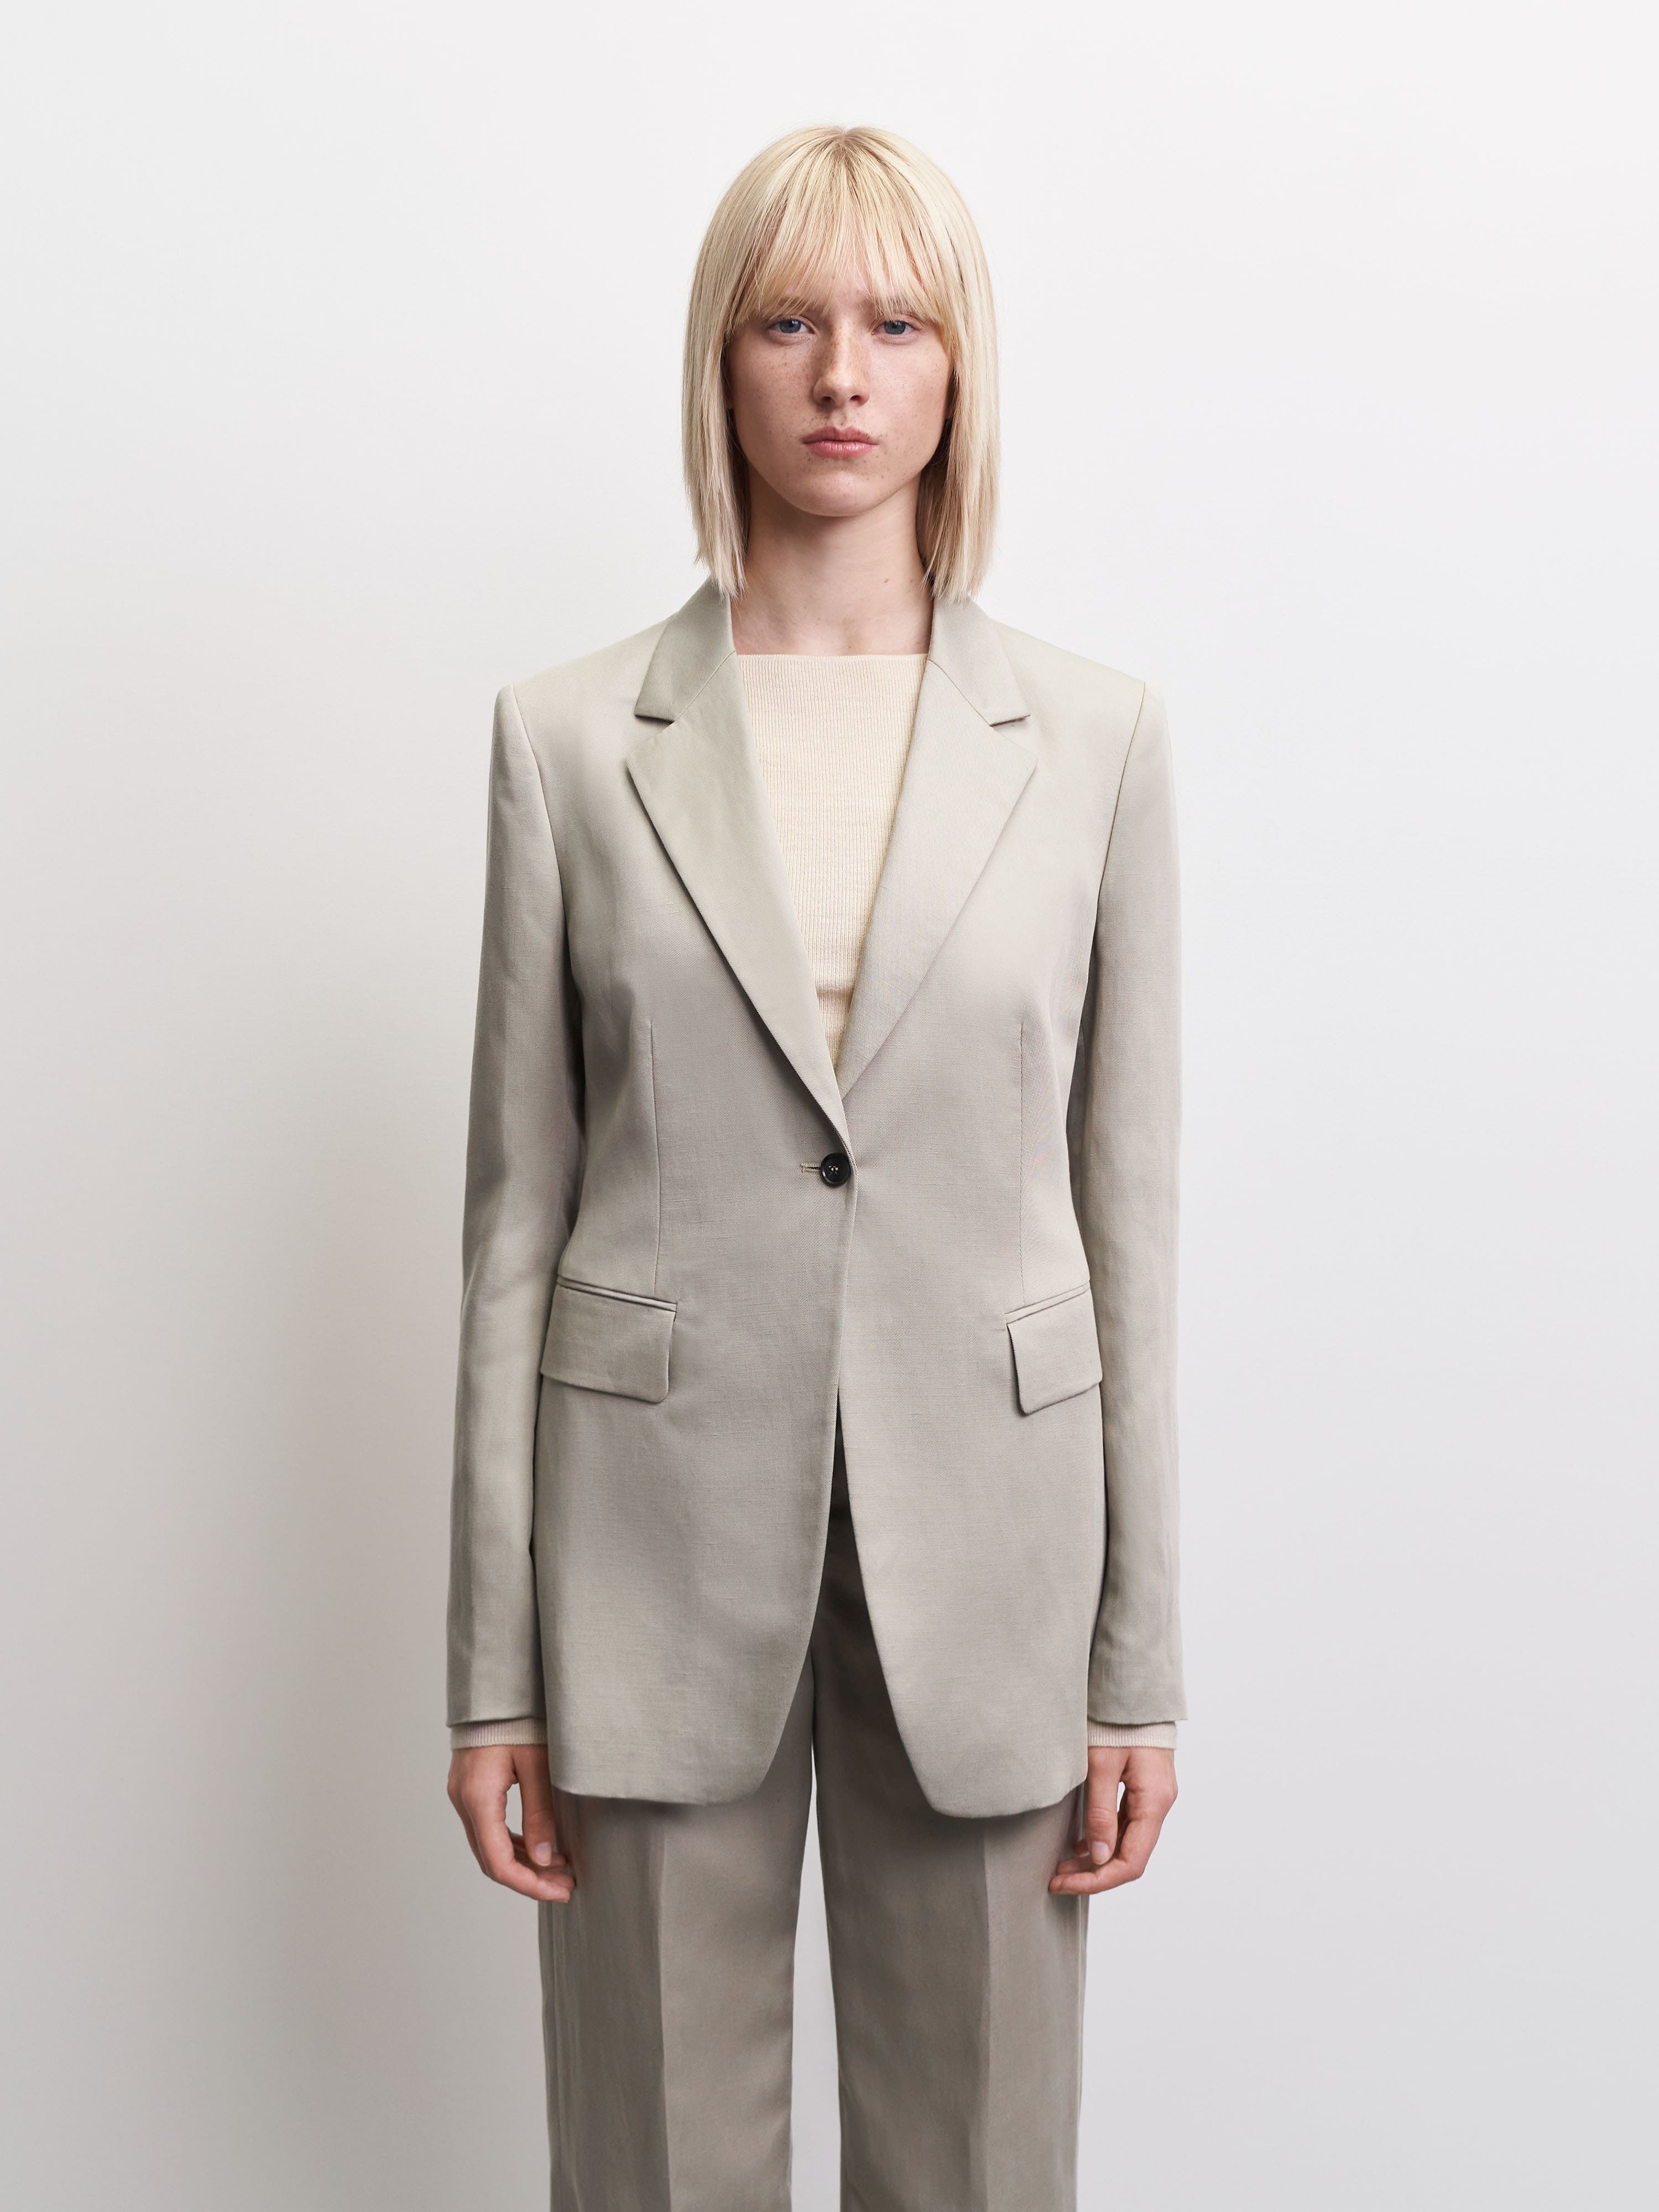 Tiger of Sweden Narina Blazer in Light Taupe S70030014 1Y1 FROM EIGHTYWINGOLD - OFFICIAL BRAND PARTNER